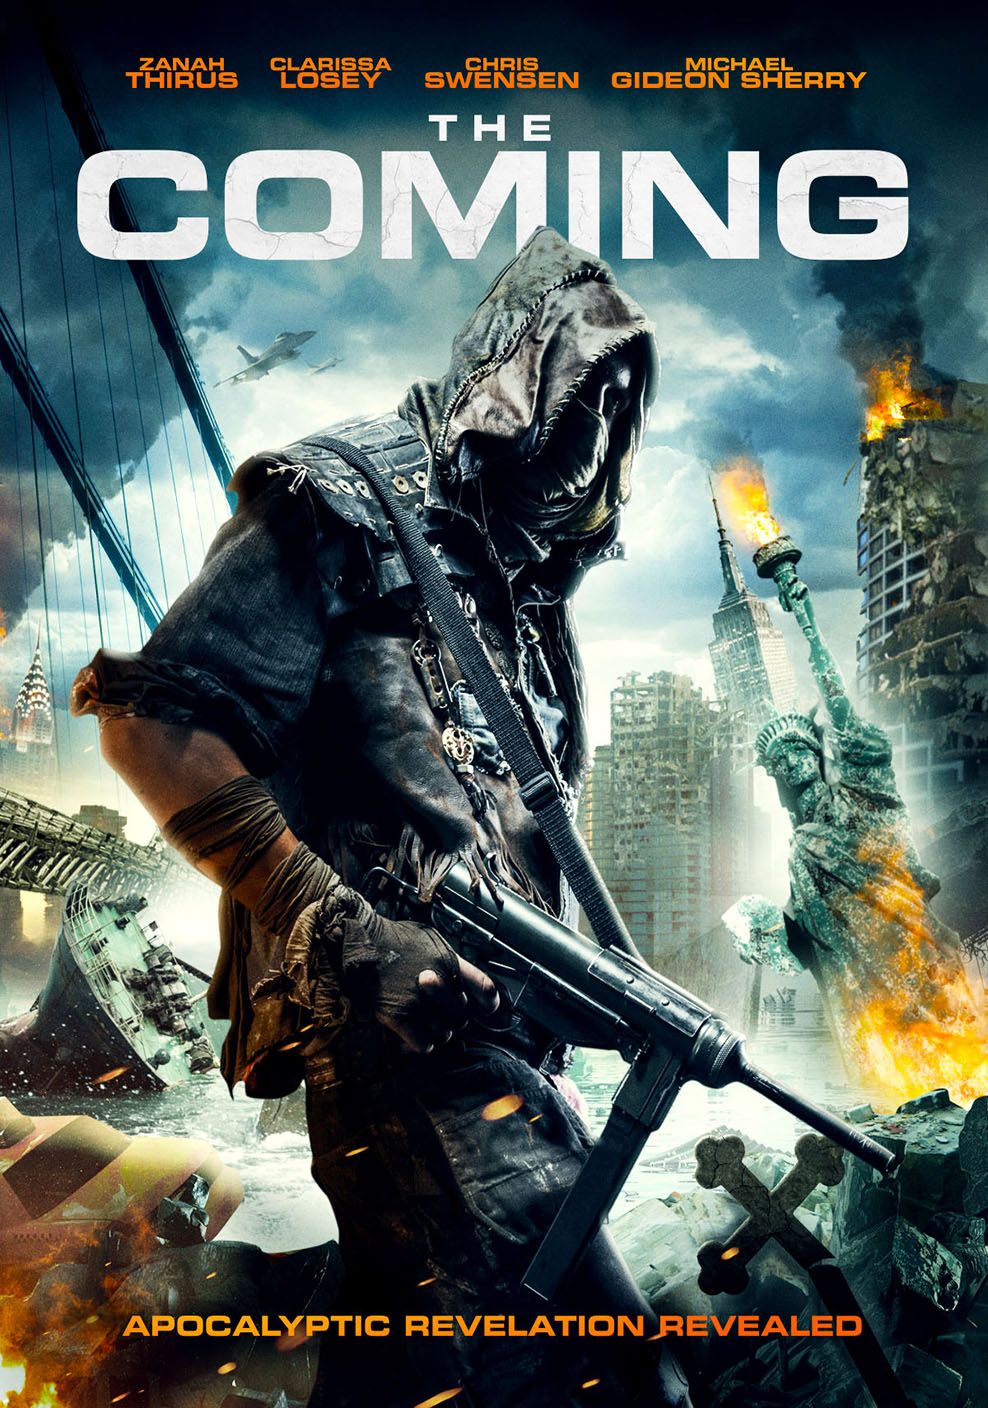 Keyart for the movie The Coming